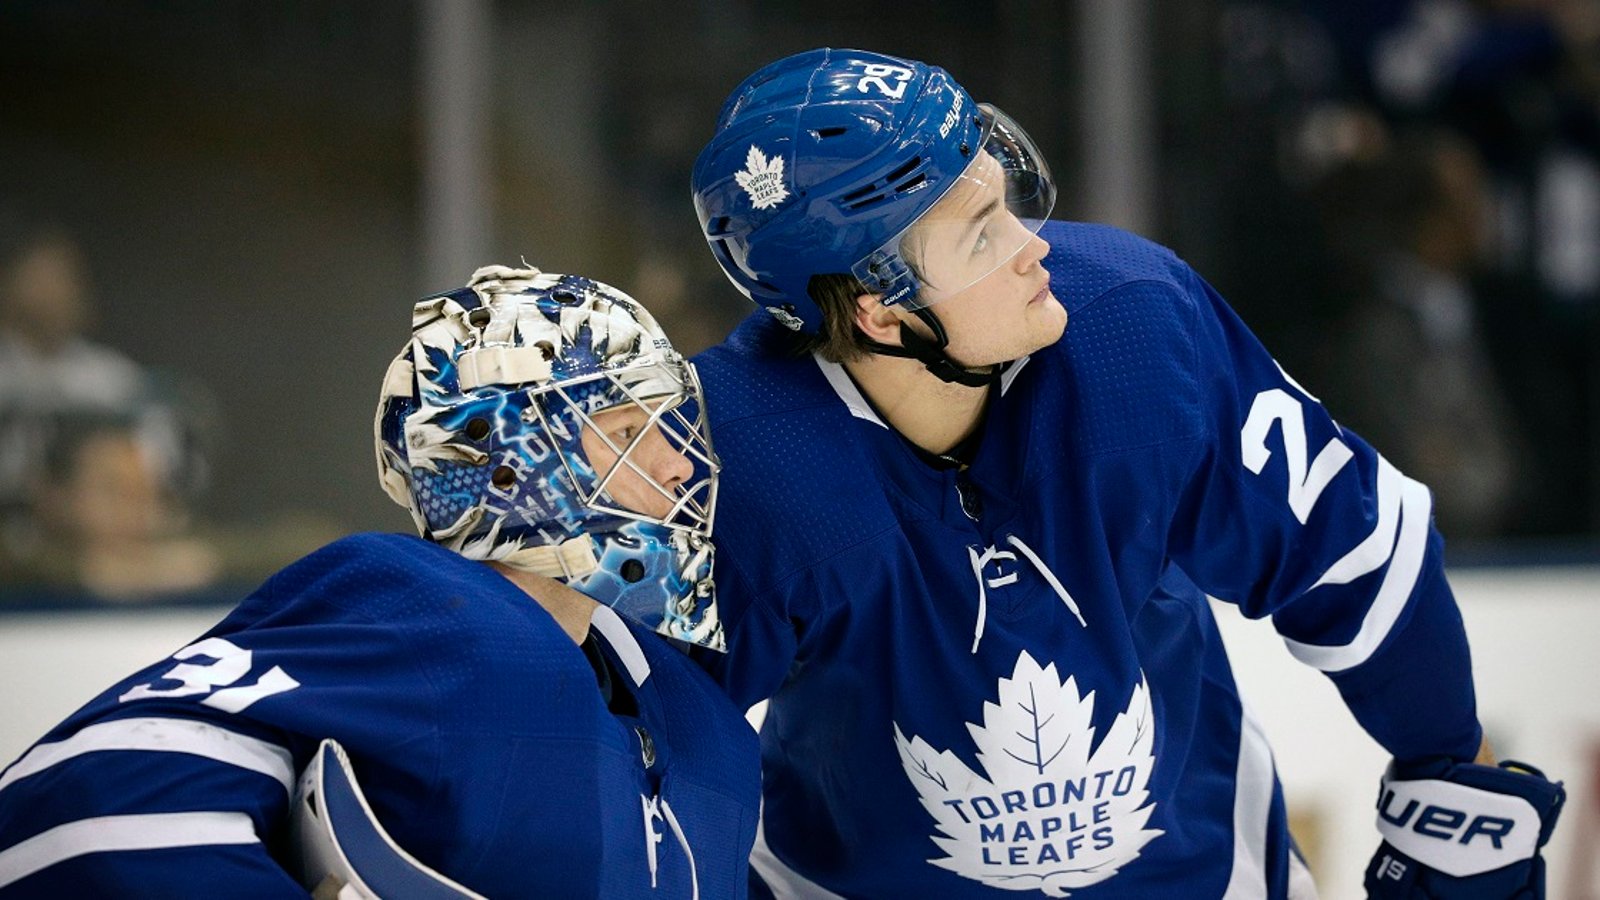 Breaking: Big development in Nylander negotiations on Monday could determine his future.